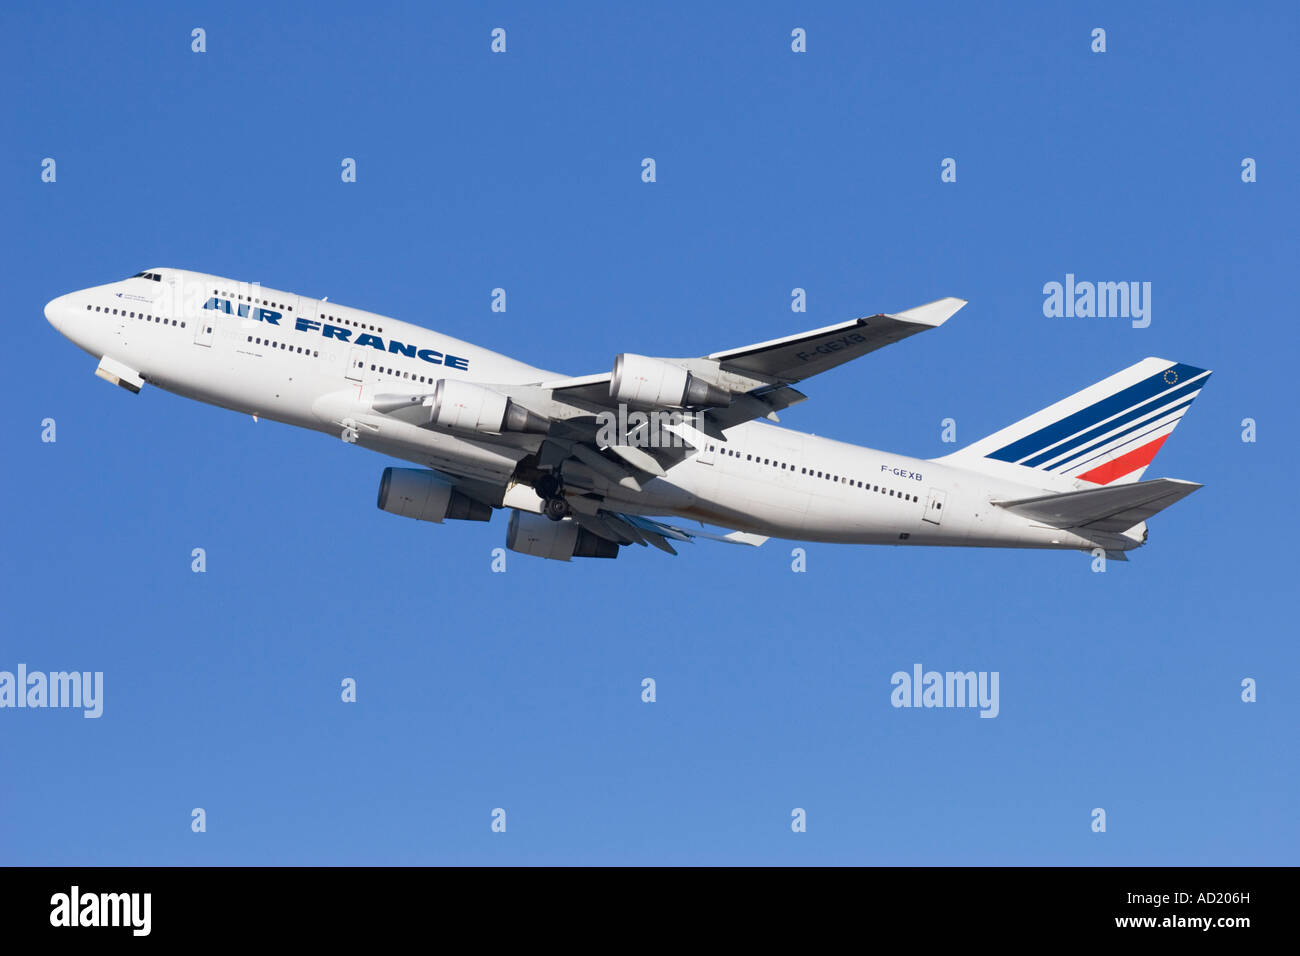 Air France Boeing 747 High Resolution Stock Photography and Images - Alamy